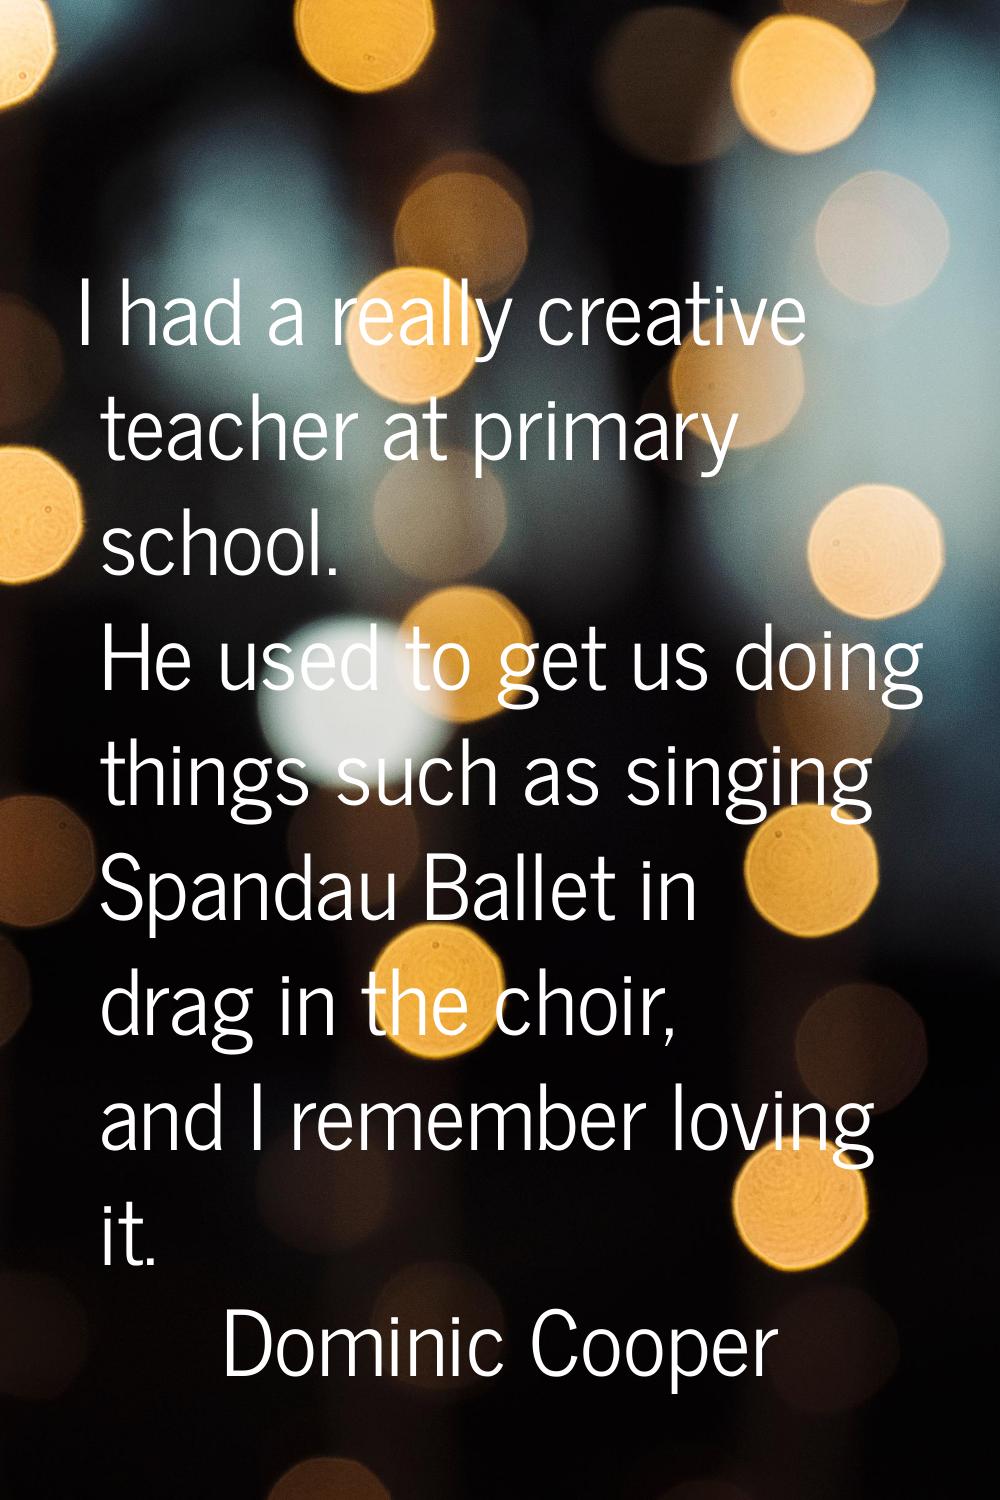 I had a really creative teacher at primary school. He used to get us doing things such as singing S